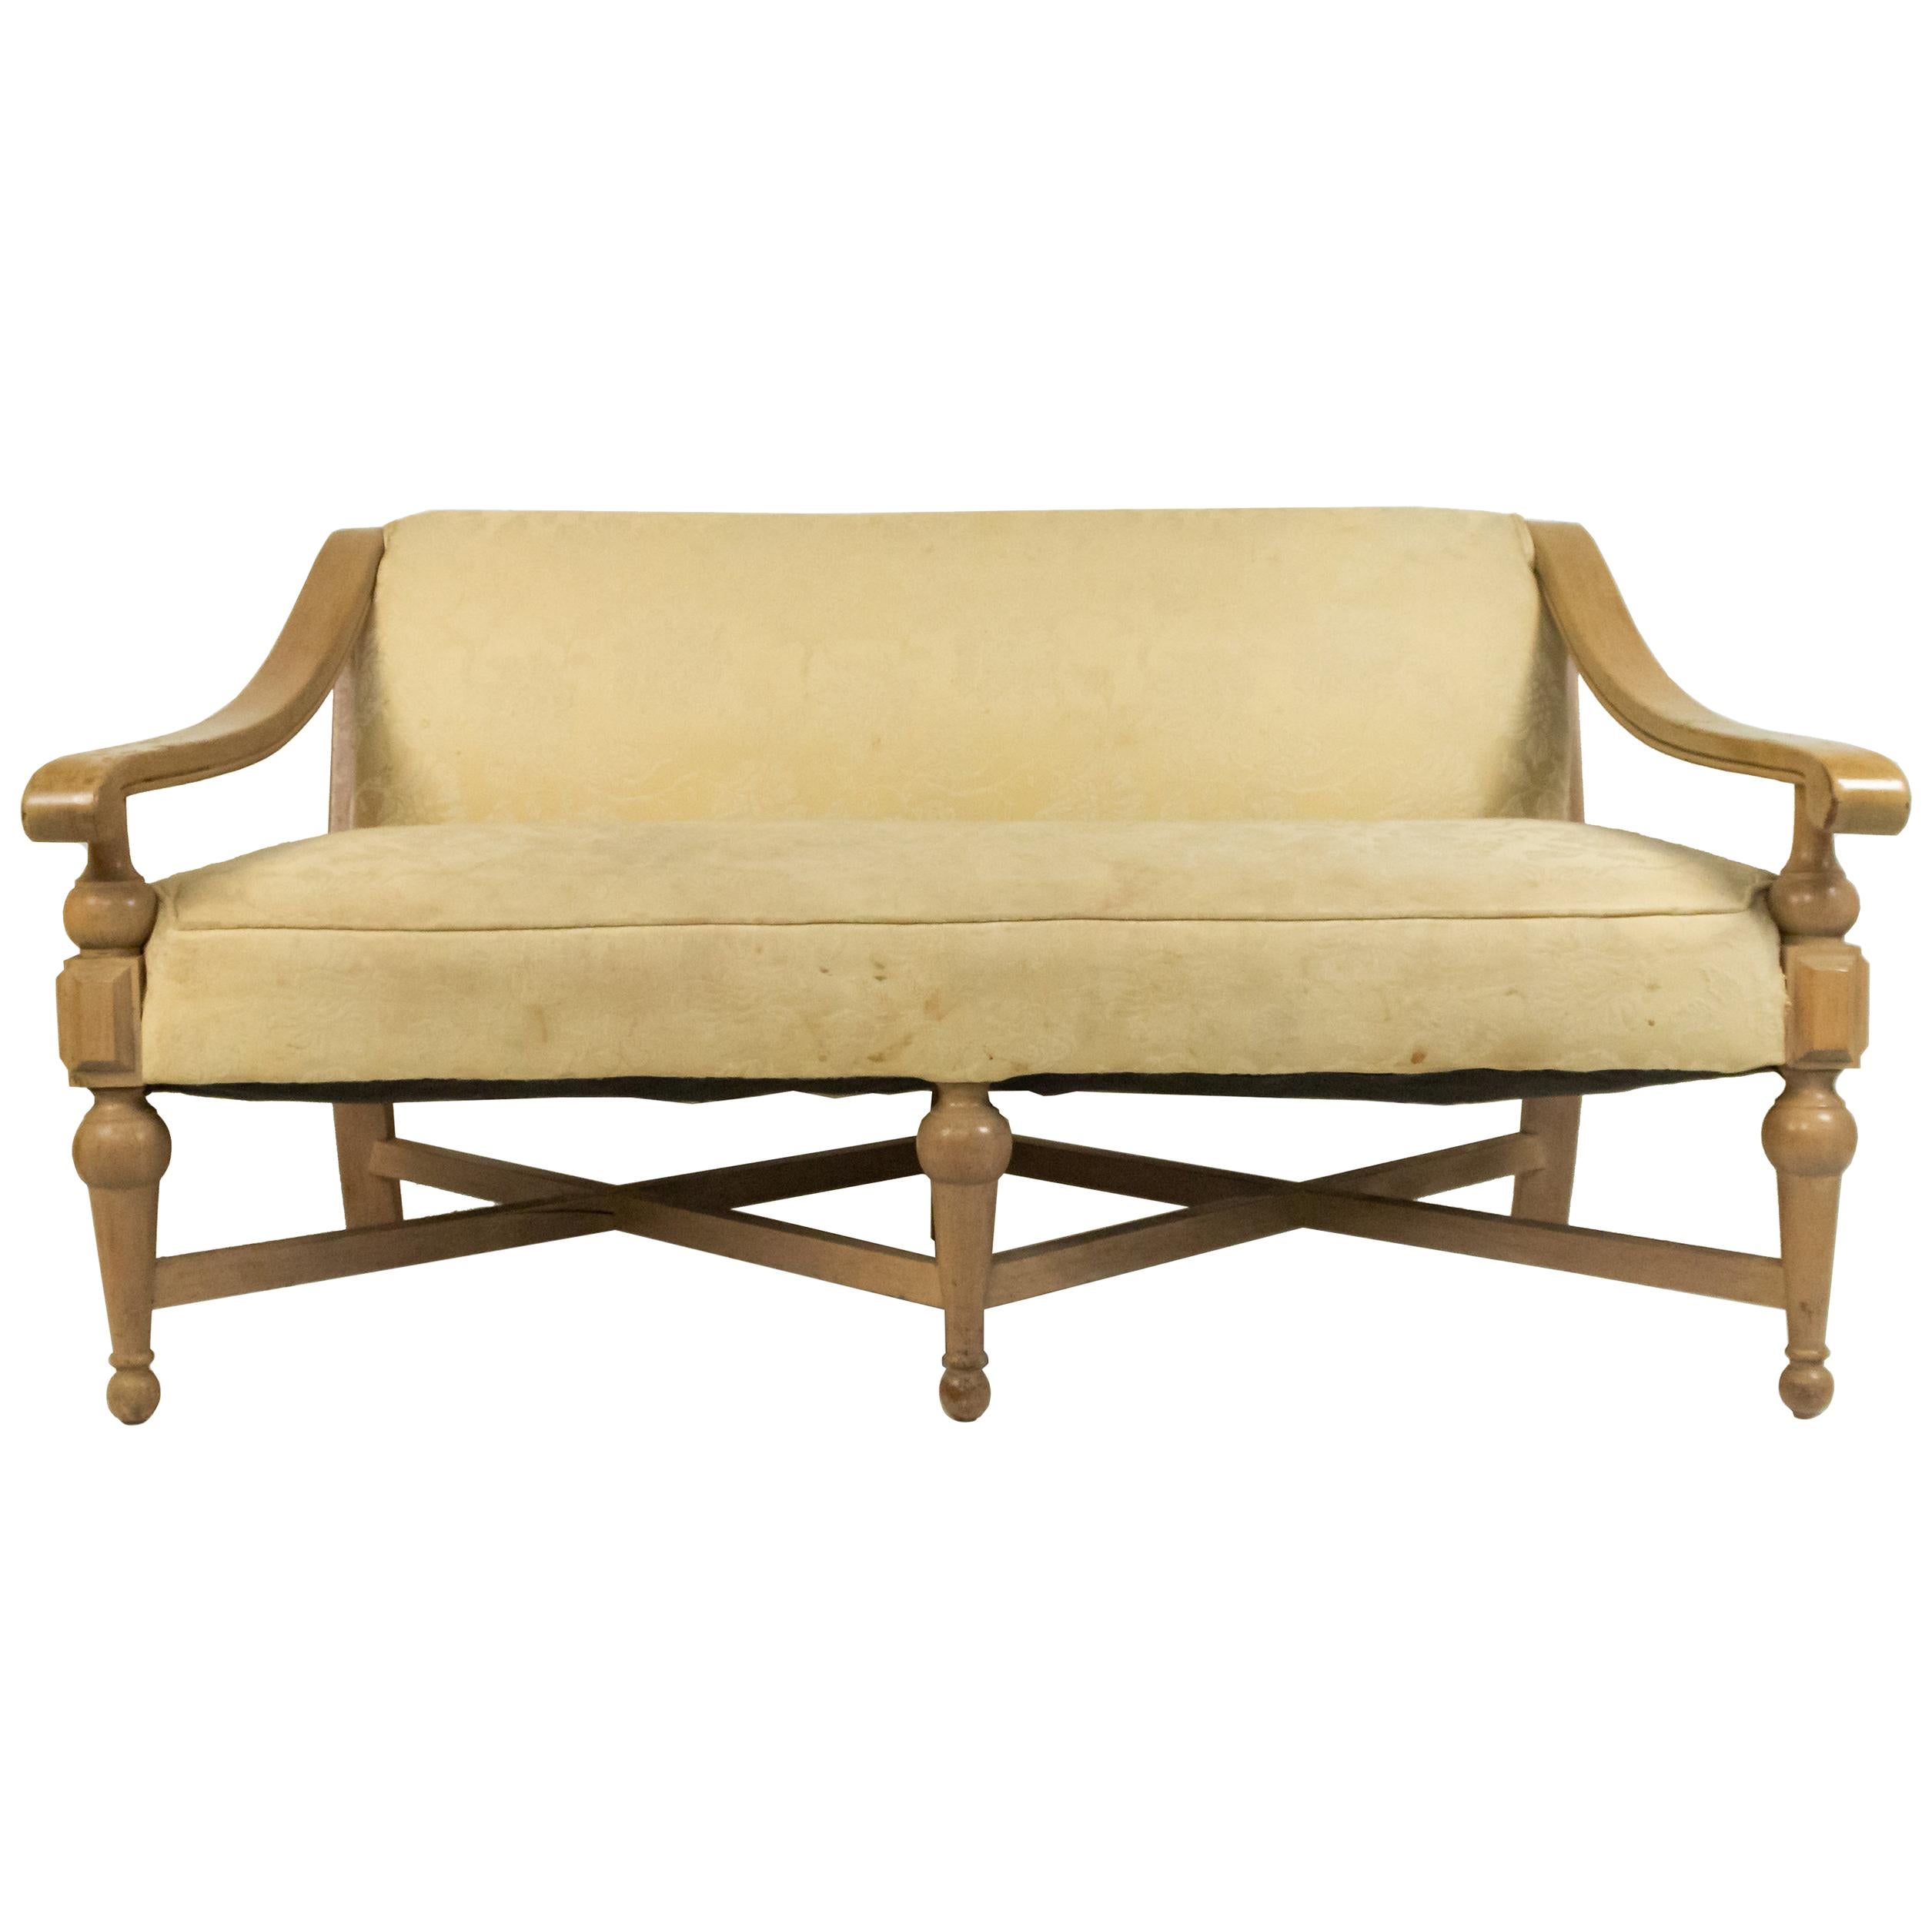 American Mid-Century Sycamore Upholstered Settee